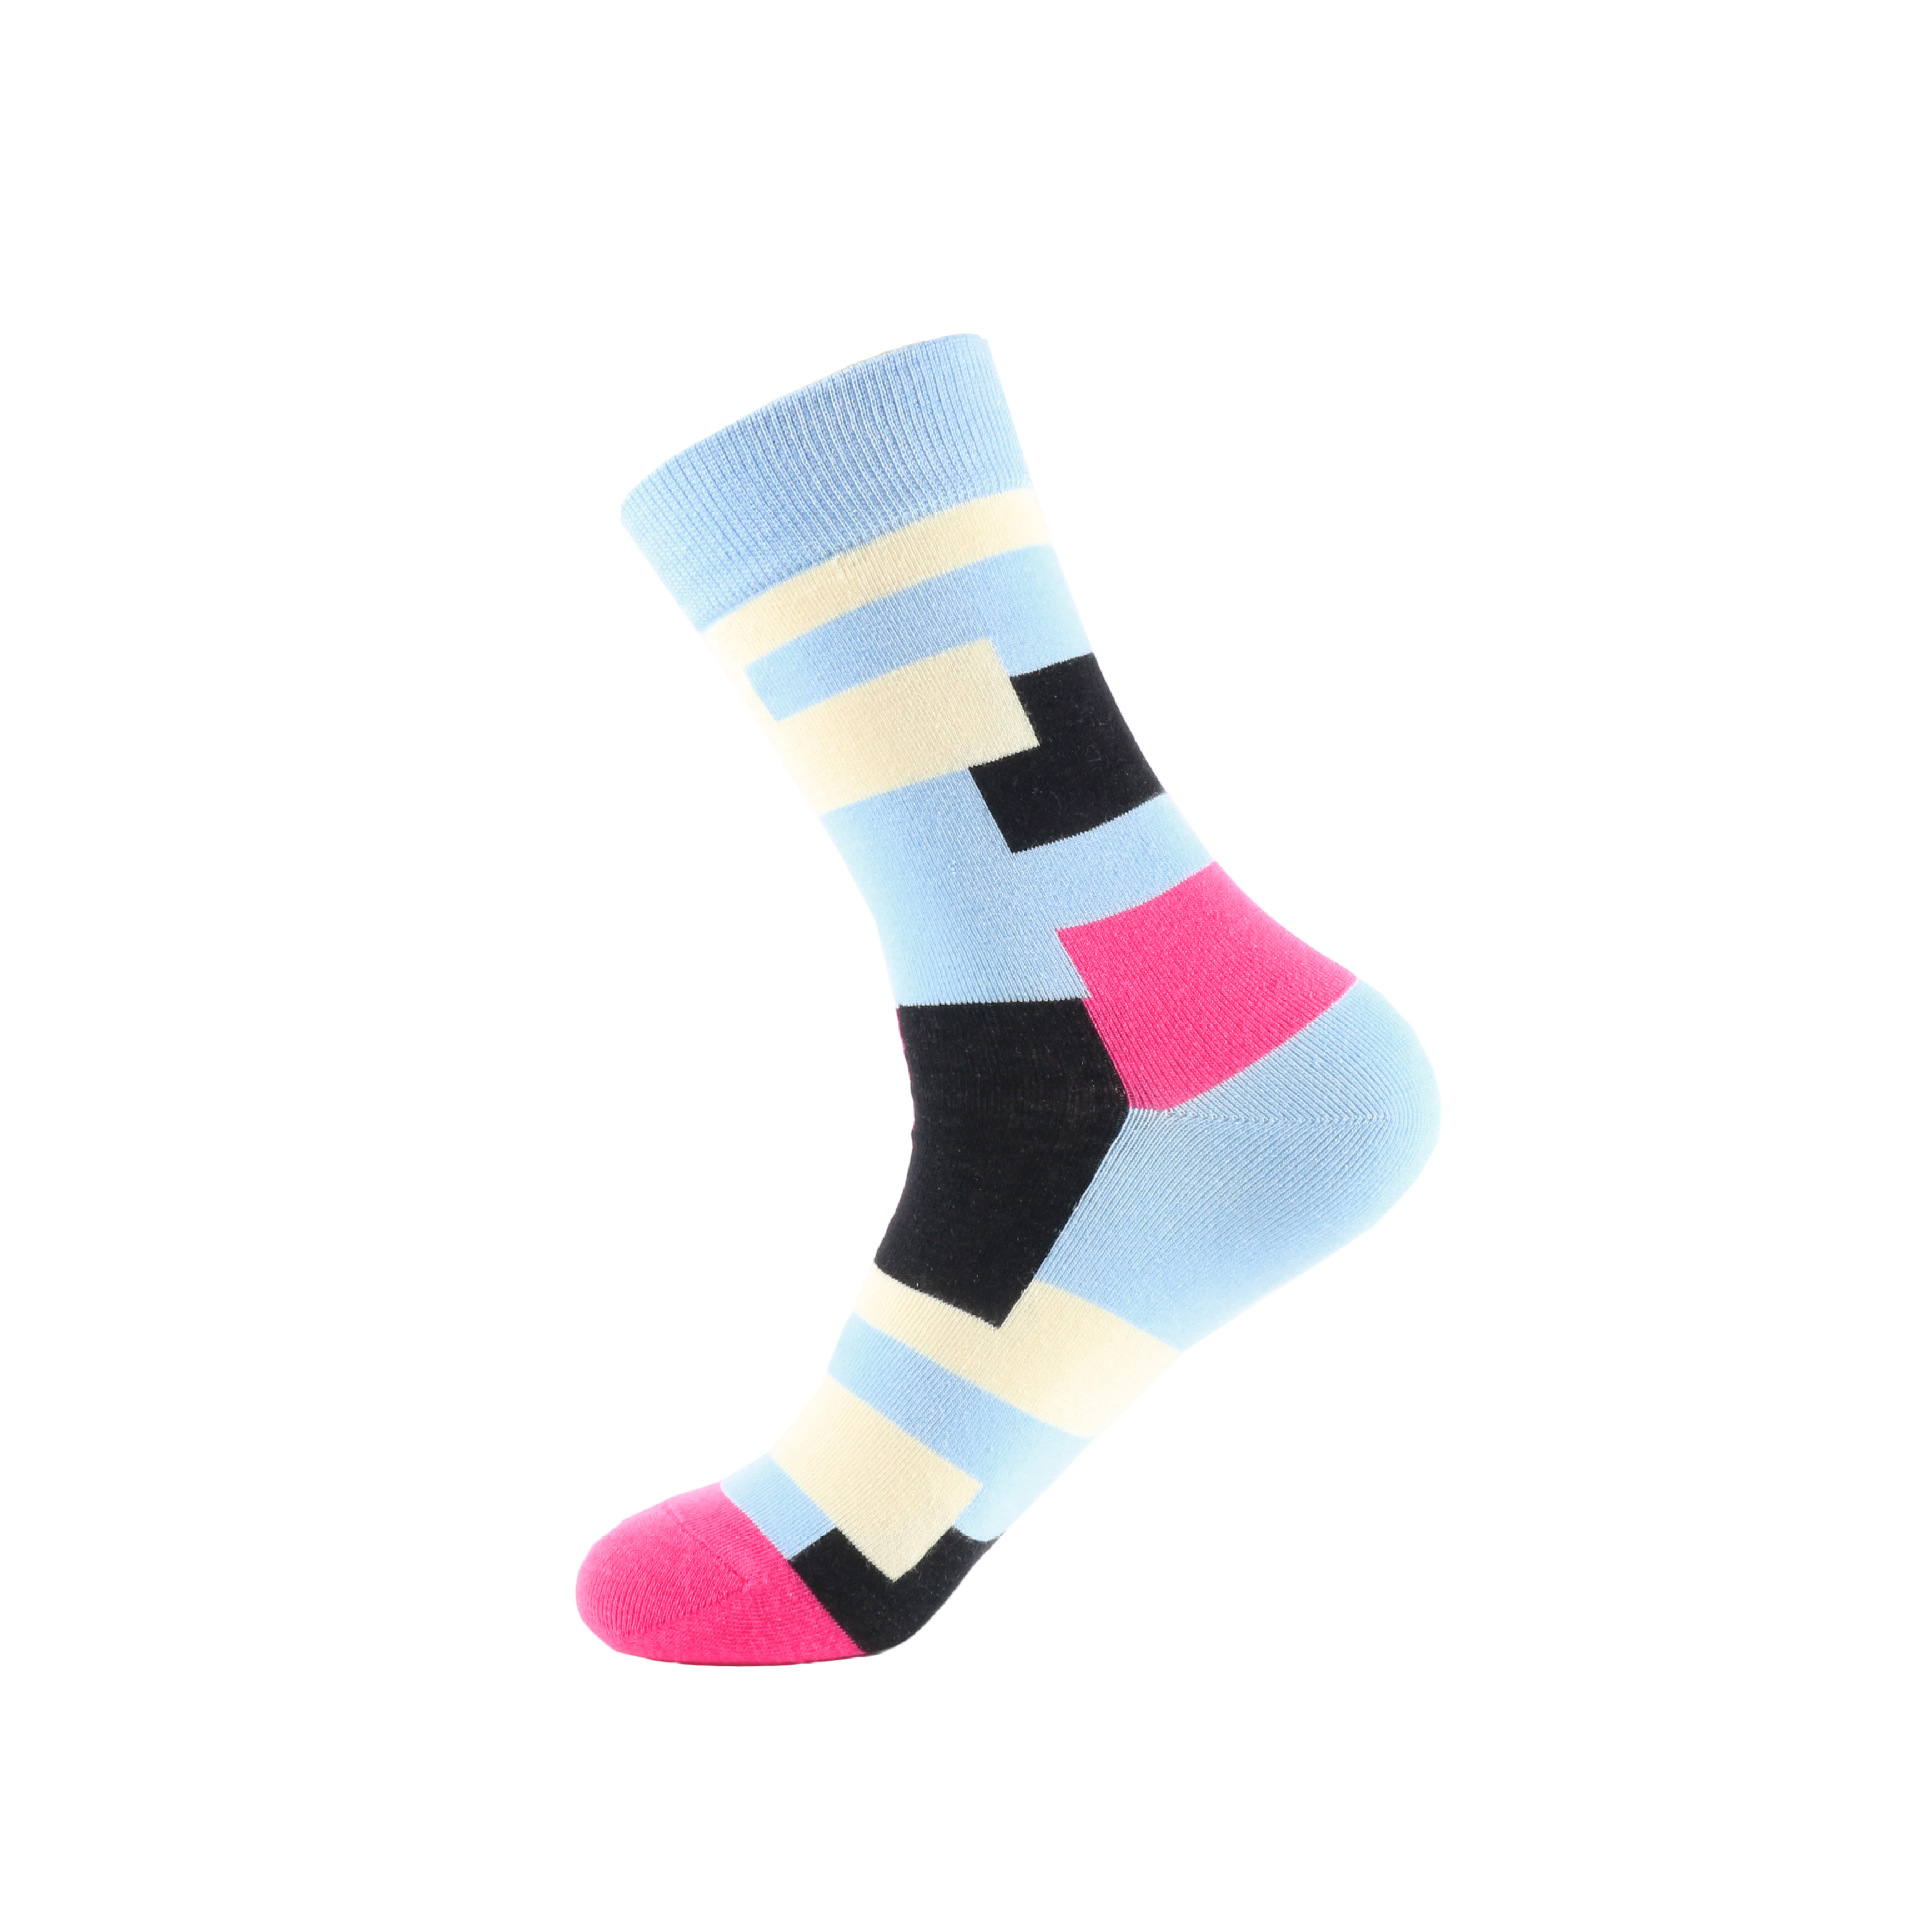 Specifically For The Winter Ms. Style Leisure Wild Cotton Socks In Tube Socks